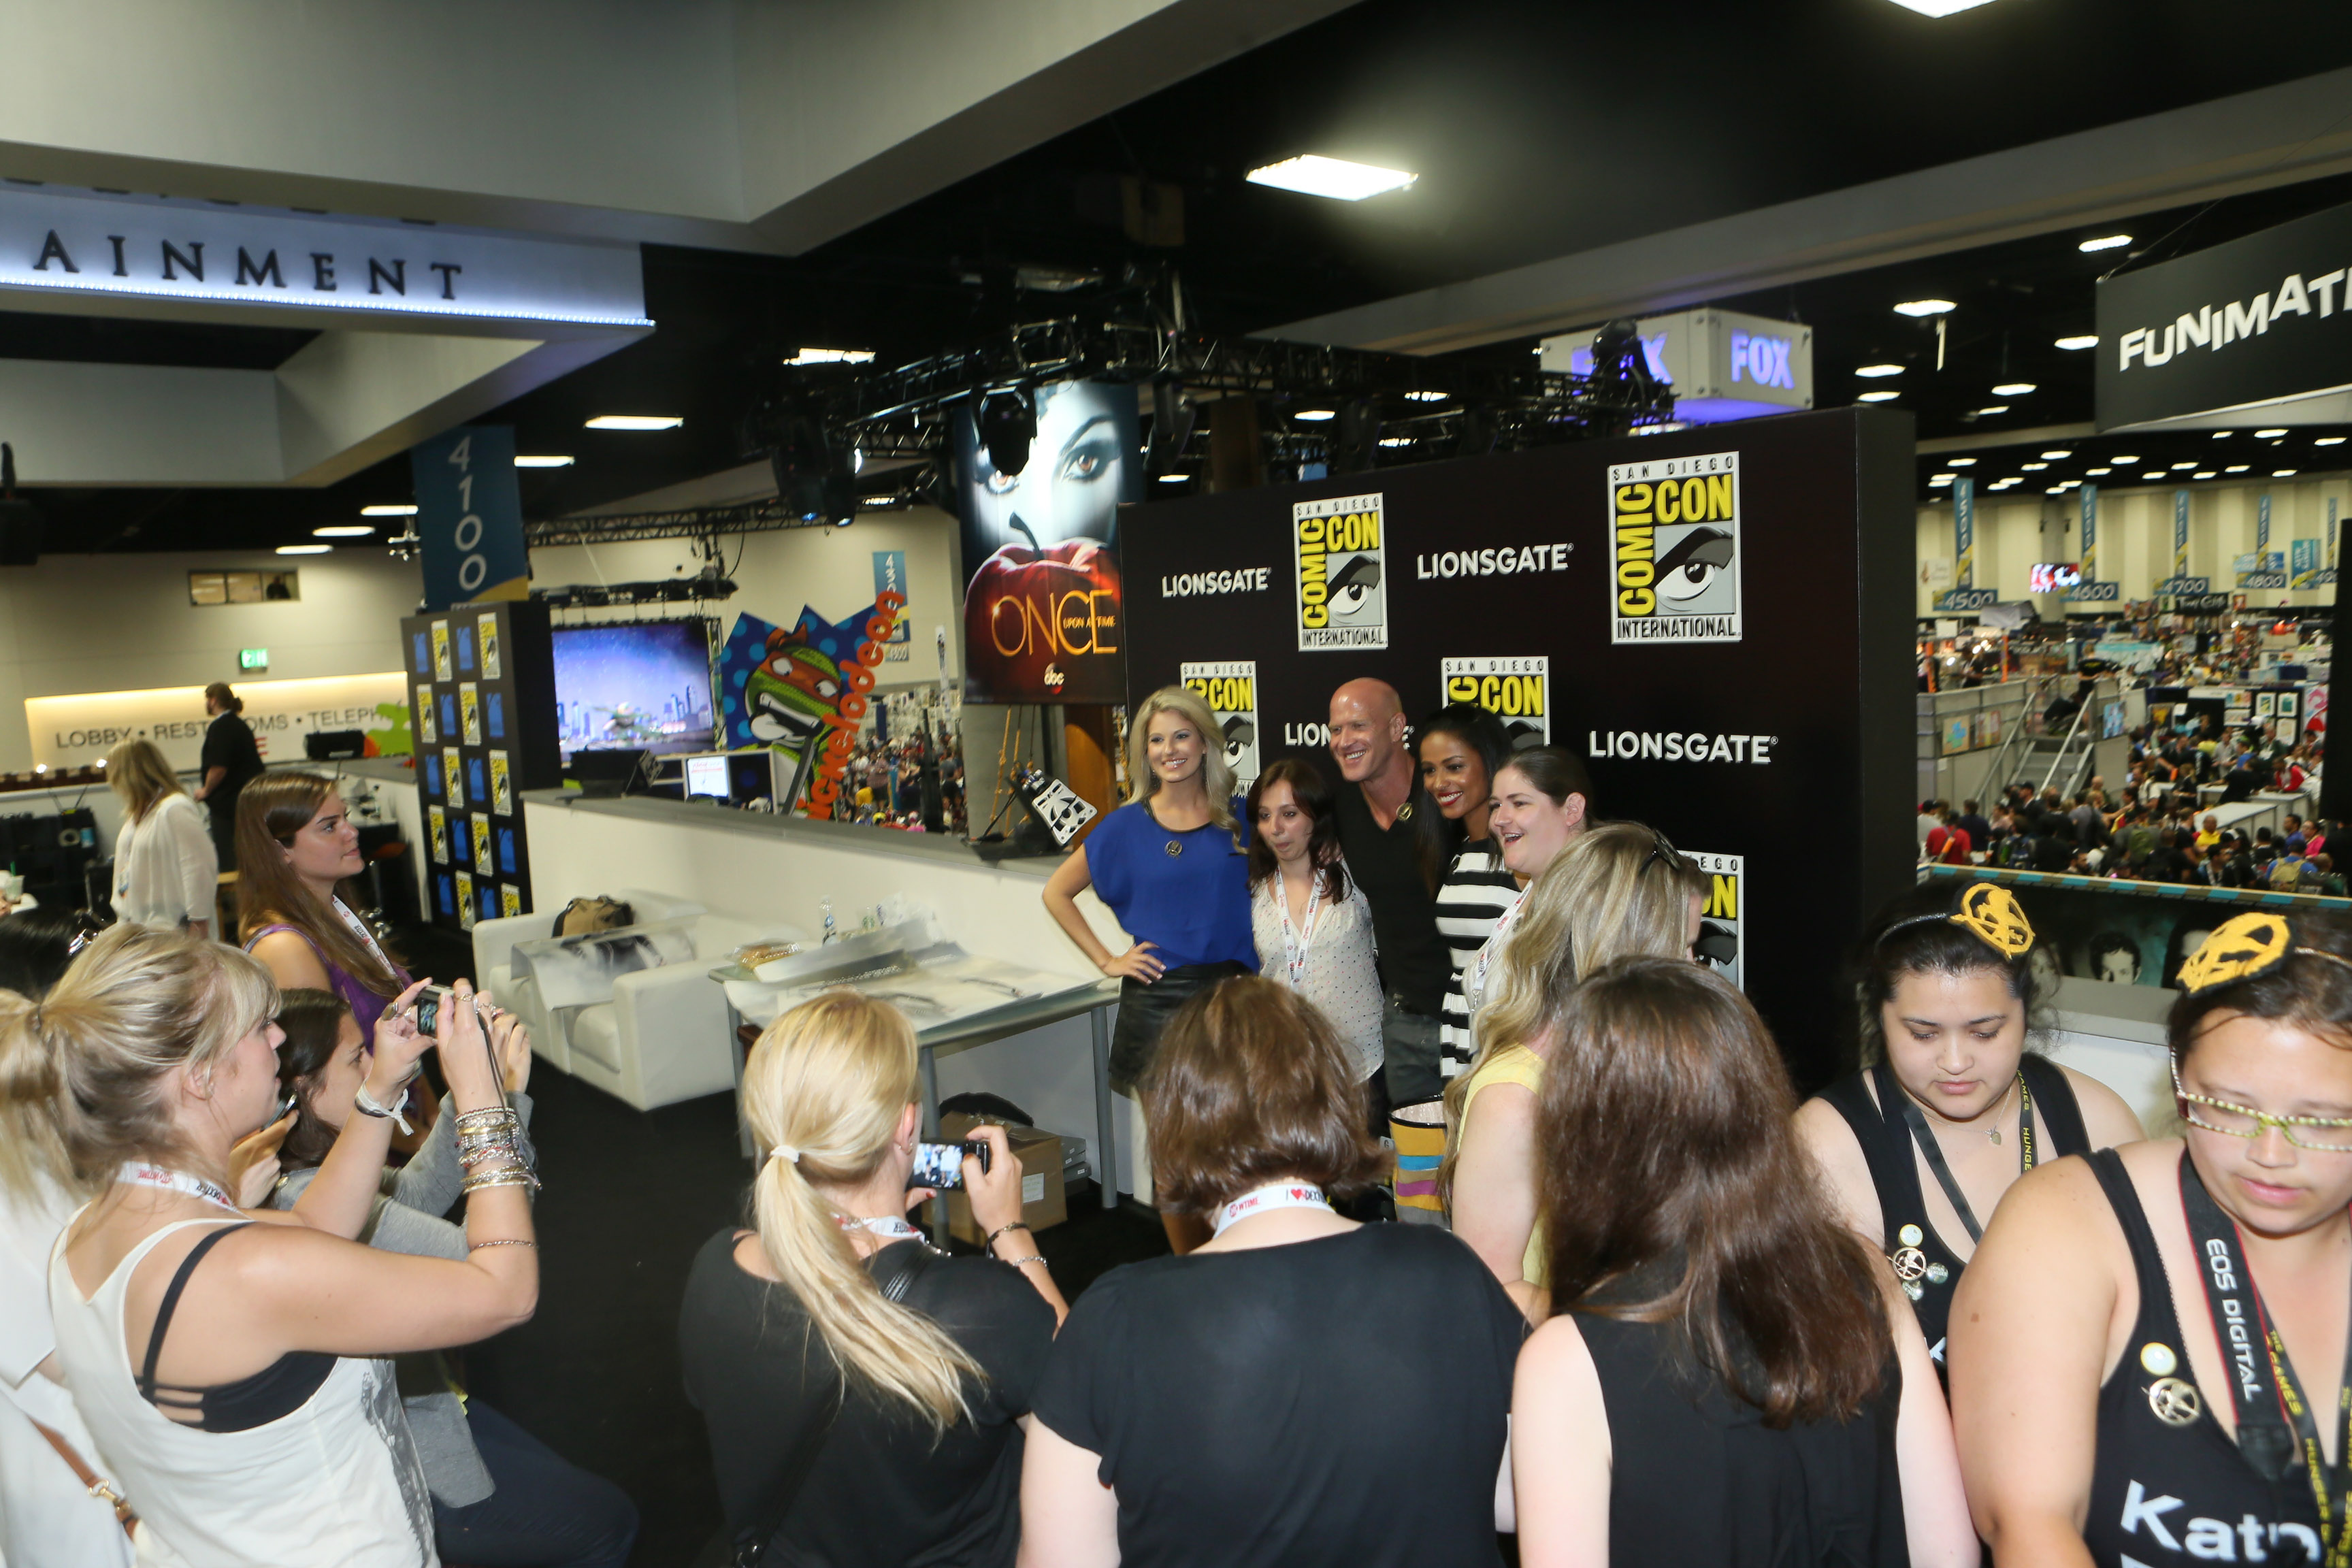 Lionsgate's 'Catching Fire' Talent Signing and Fan Meet and Greet at 2013 Comic-Con